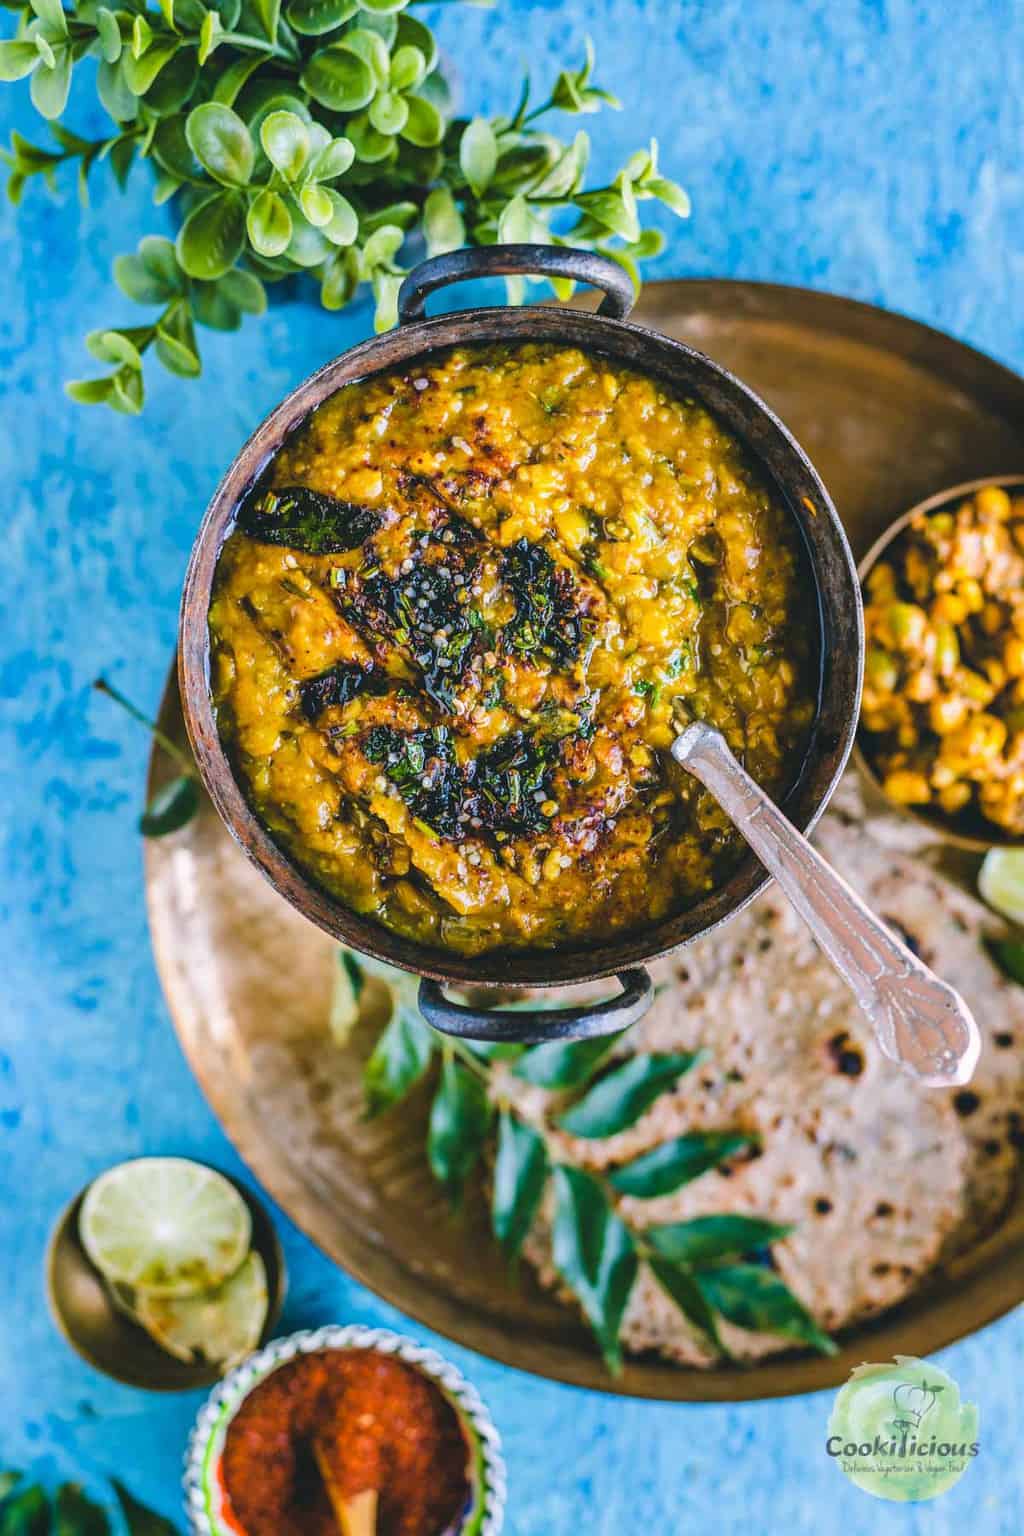 Methi Dal served in a small kadai with a spoon in it